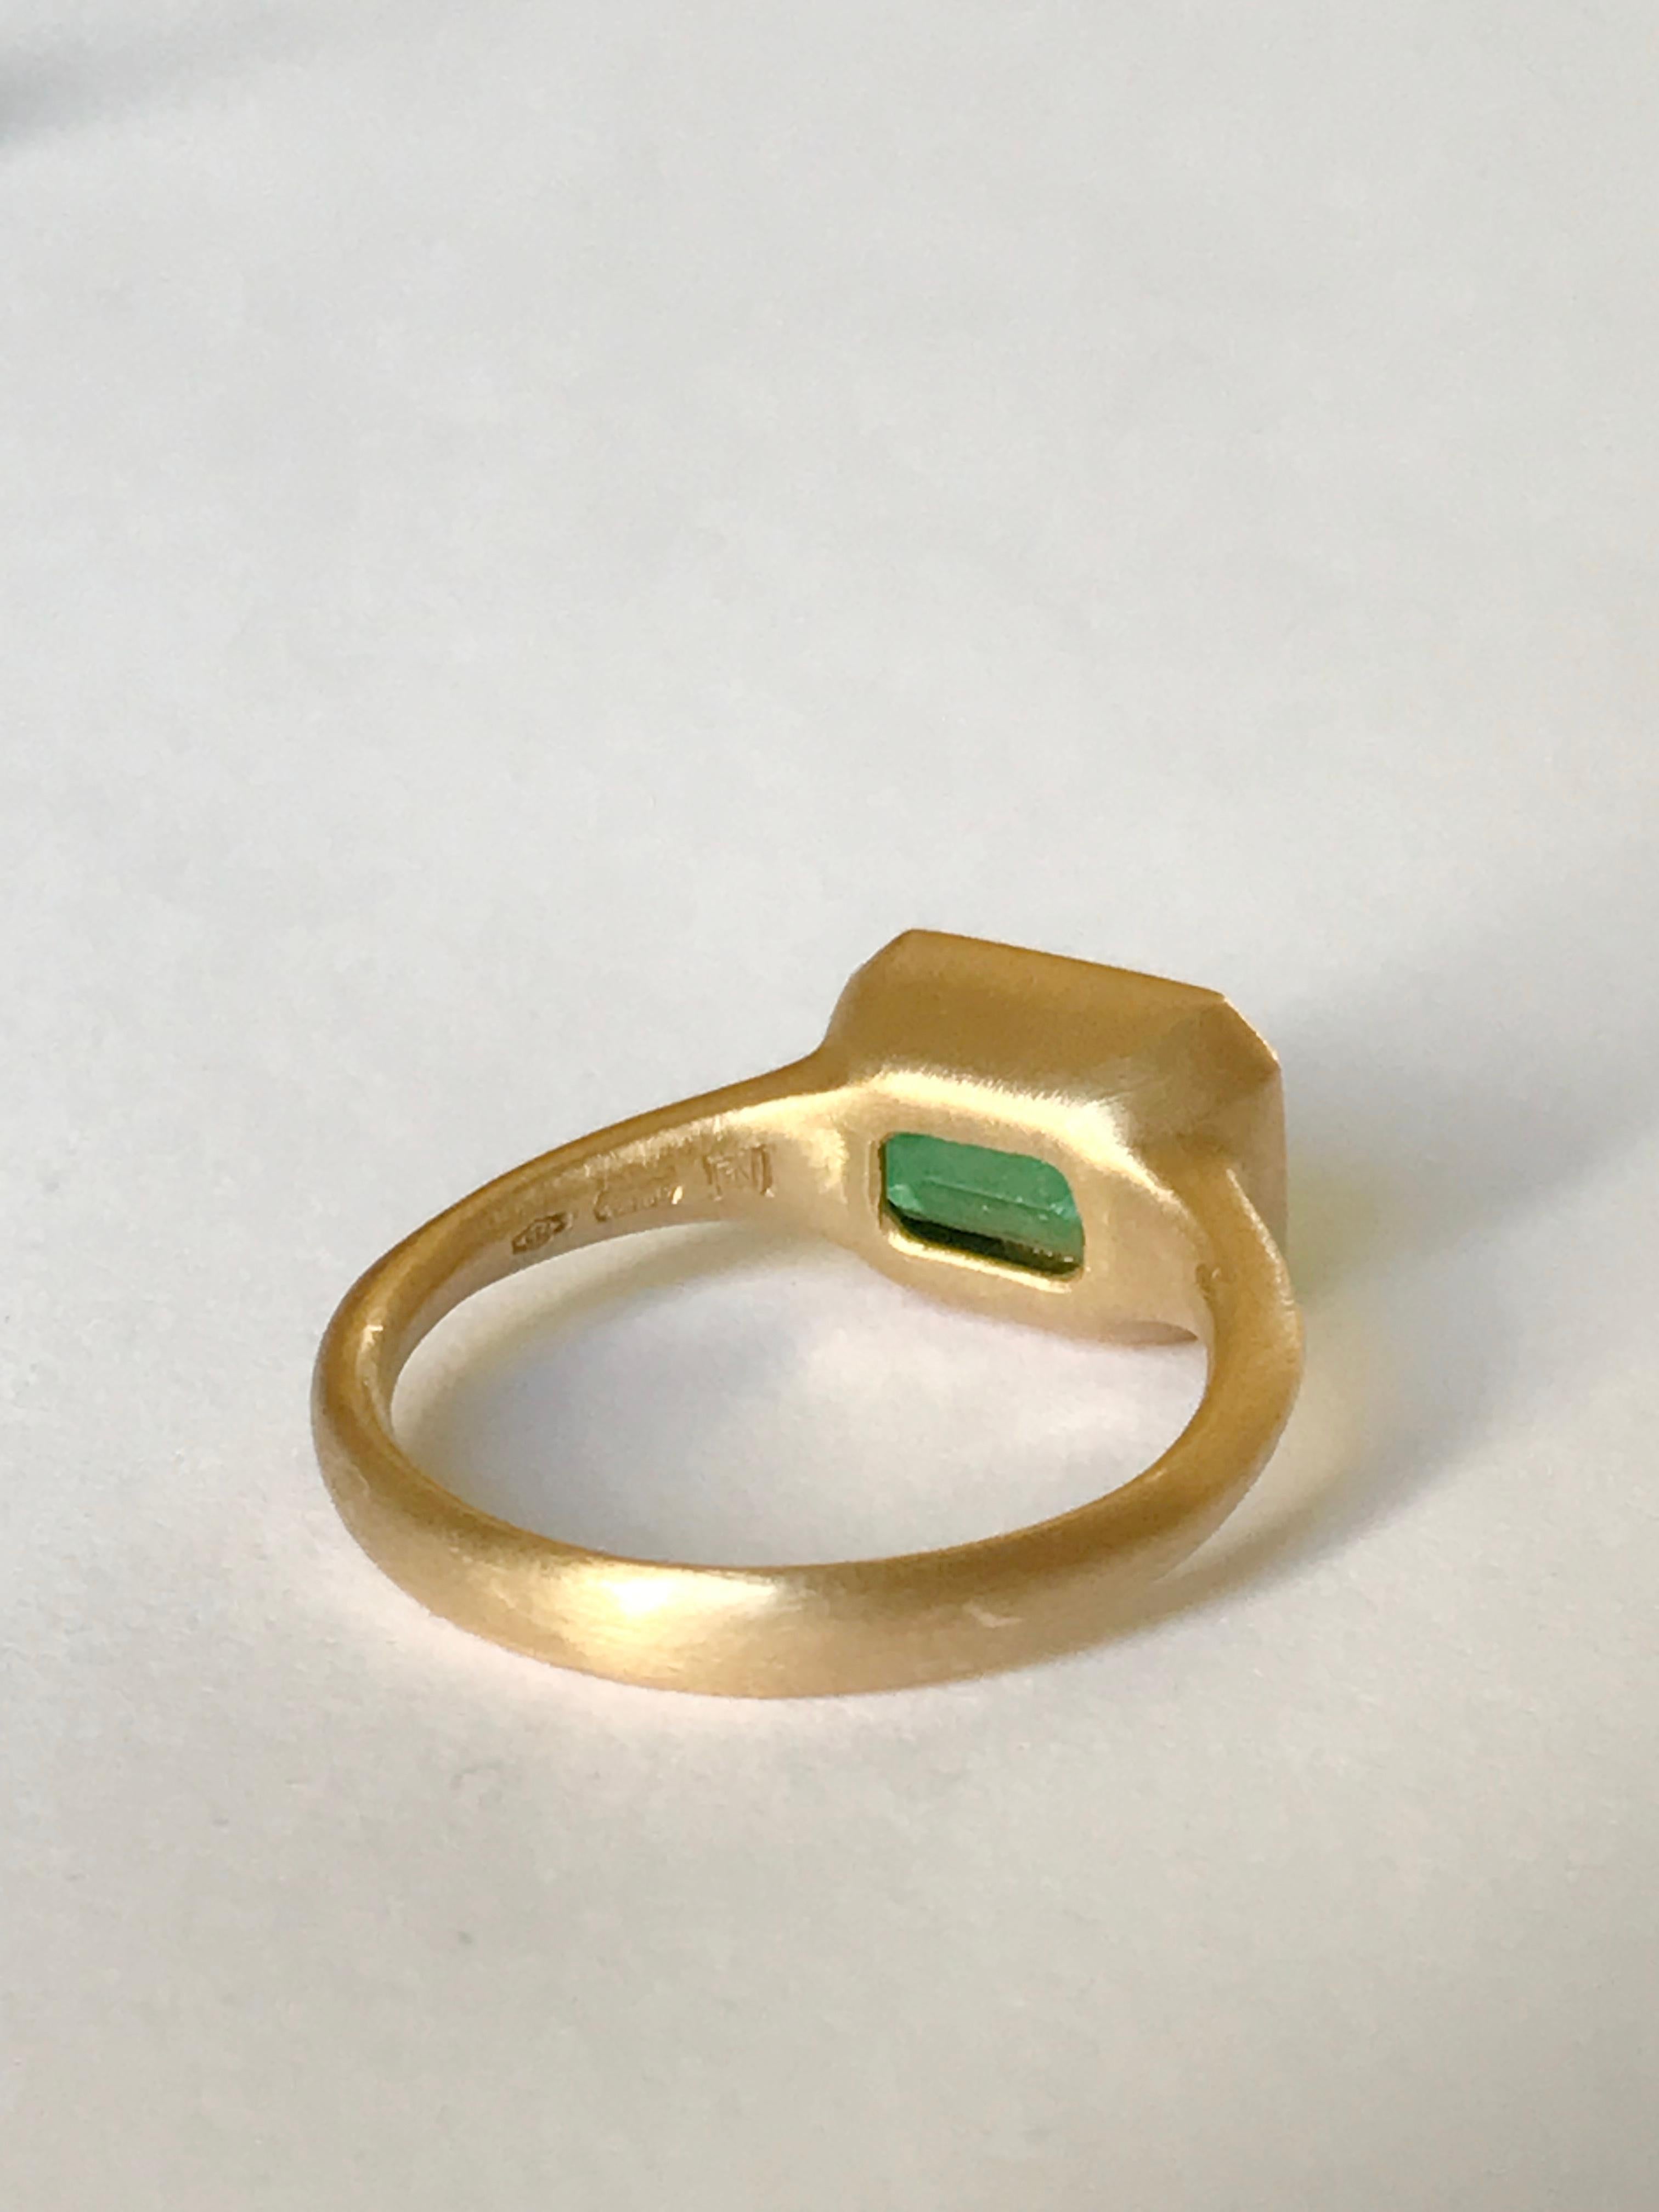 Dalben 2, 46 Carat Emerald Yellow Gold Ring For Sale 3